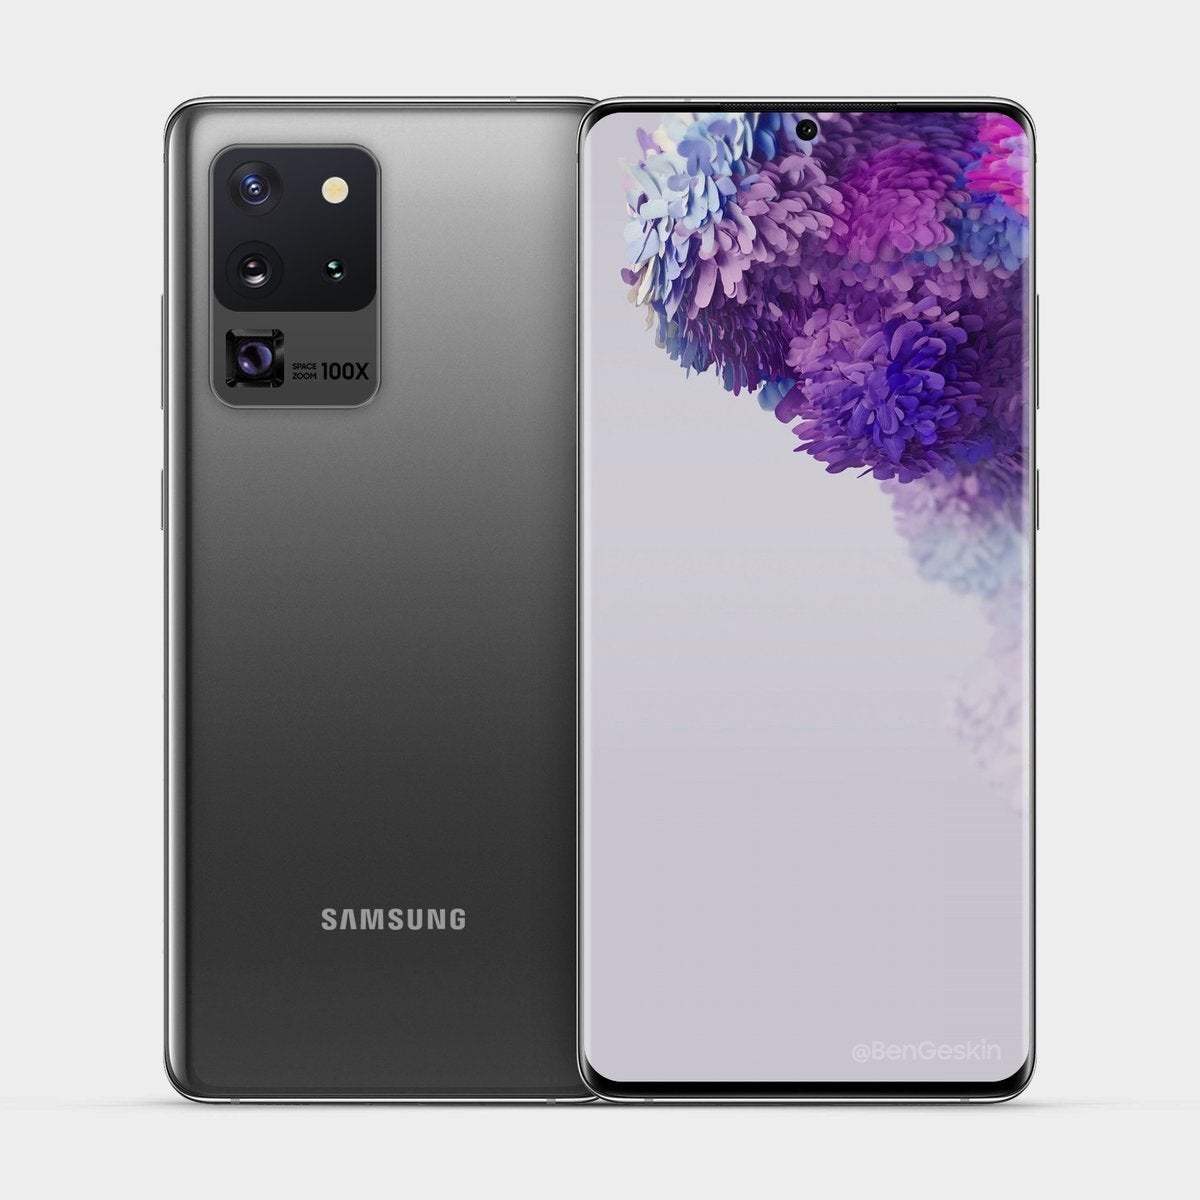 Samsung Galaxy S20 Ultra concept render by Ben Geskin - Here's how much the Galaxy S20 series and Galaxy Z Flip could cost